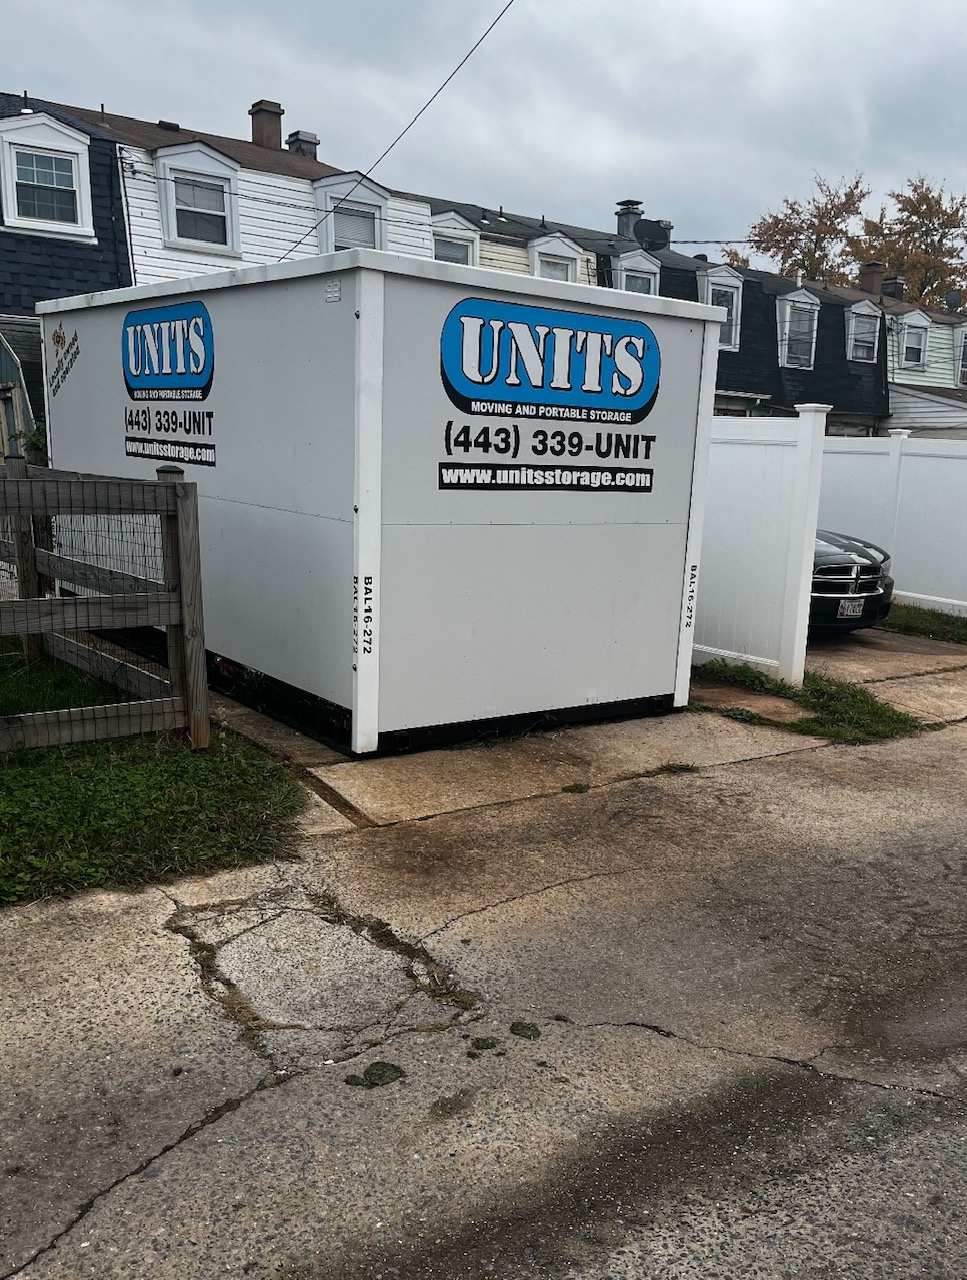 UNITS Portable Storage Container in driveway in Baltimore Maryland